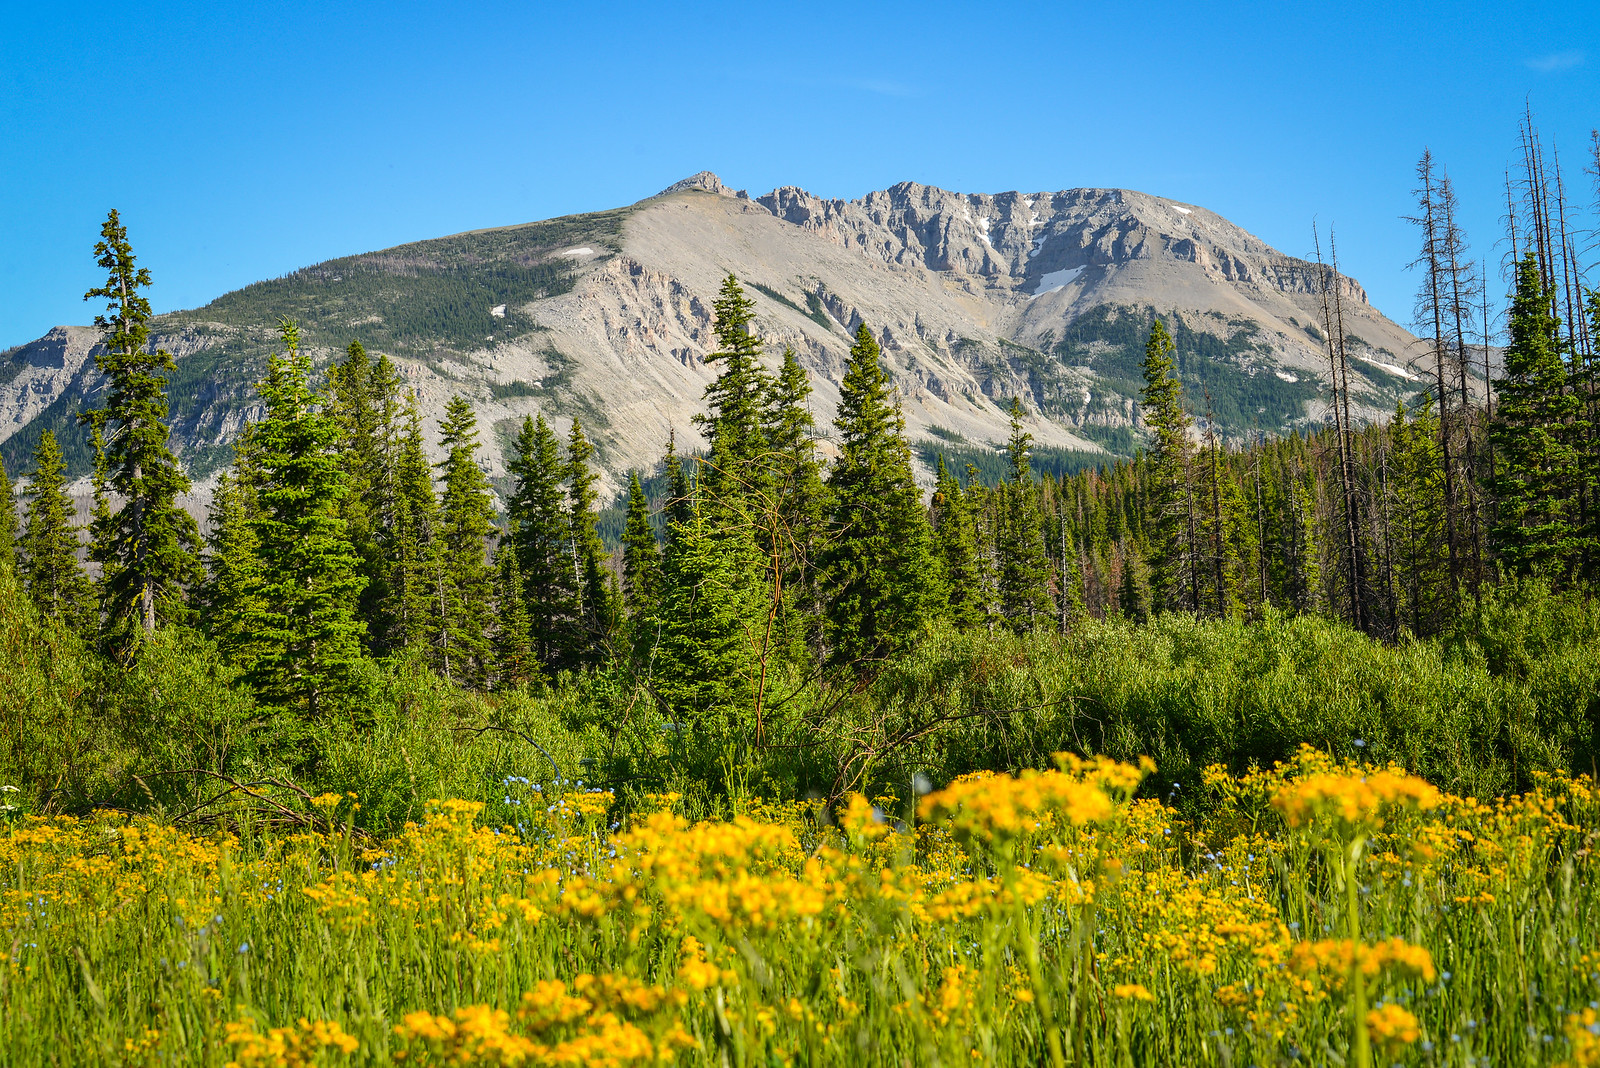 Yellow wildflowers blooming in a meadow below a mountain